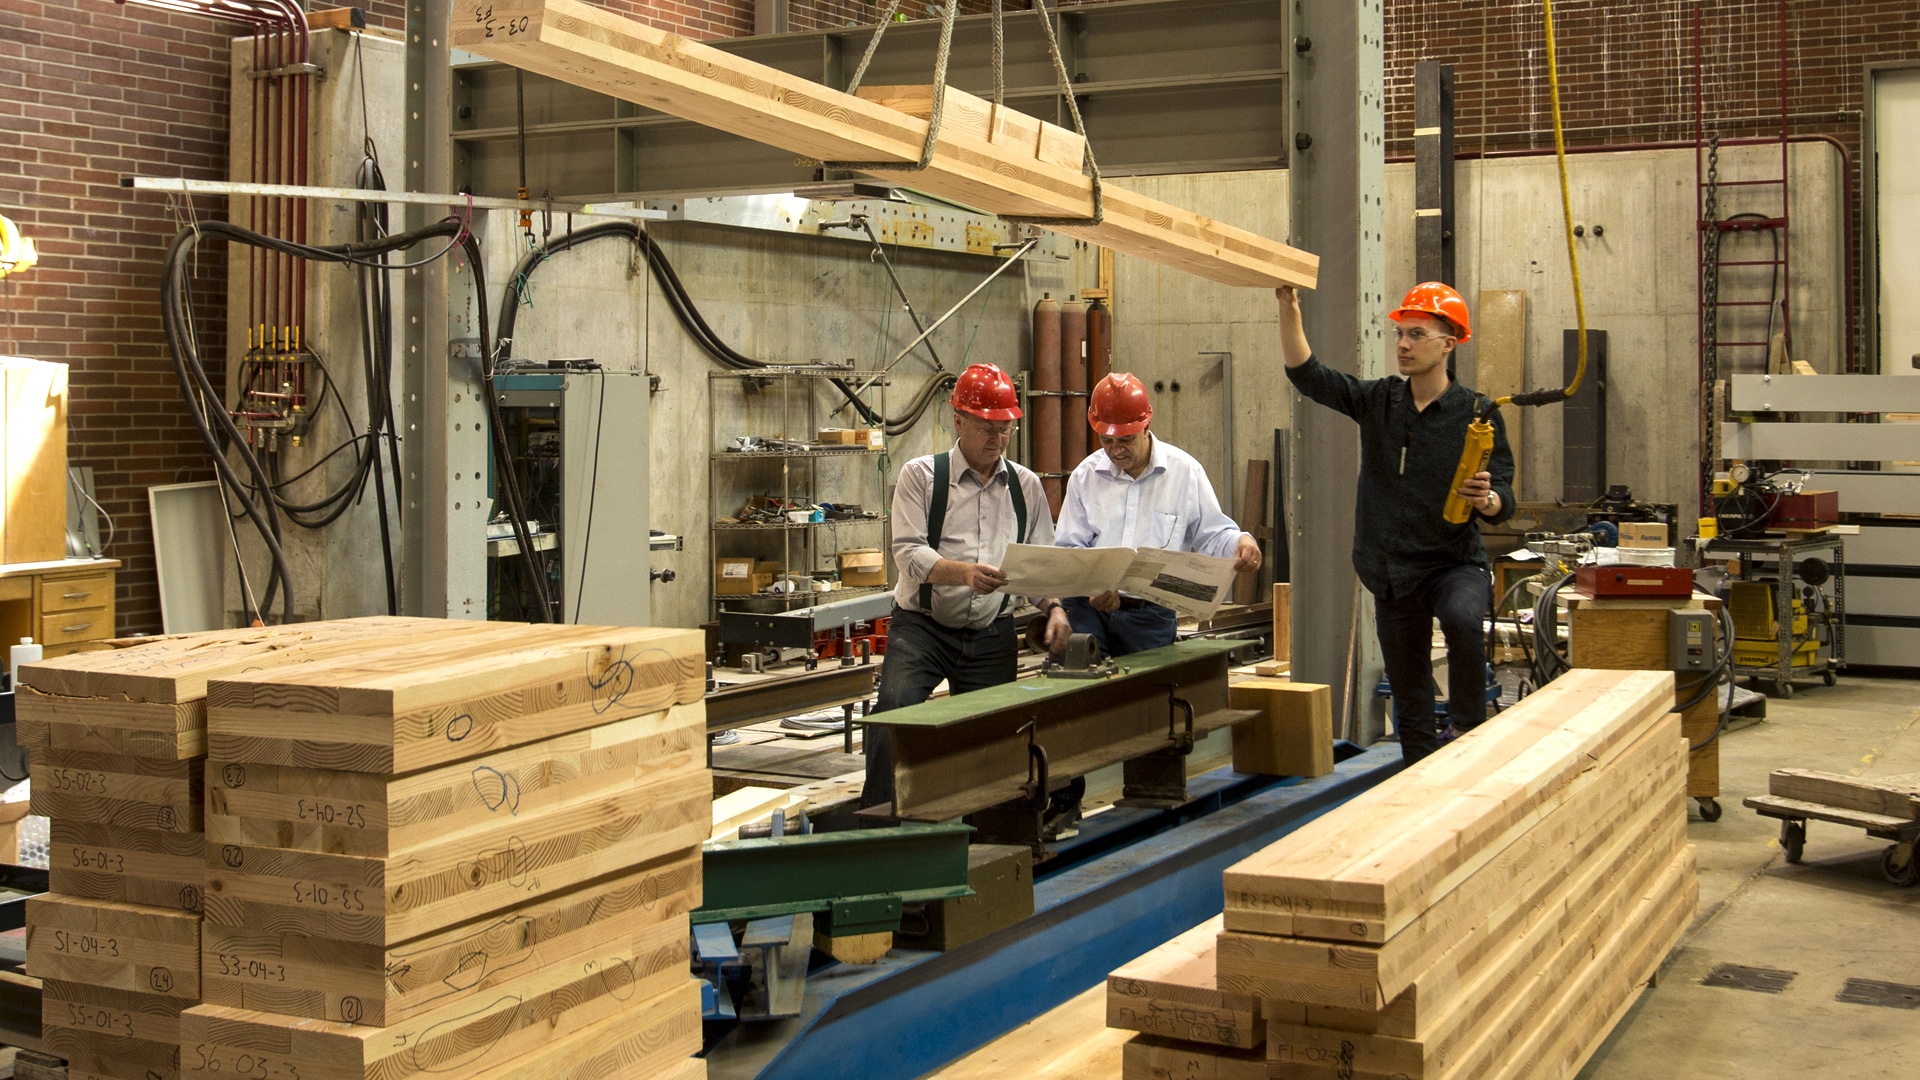 Researchers study cross-laminated timber in a laboratory at Oregon State University.